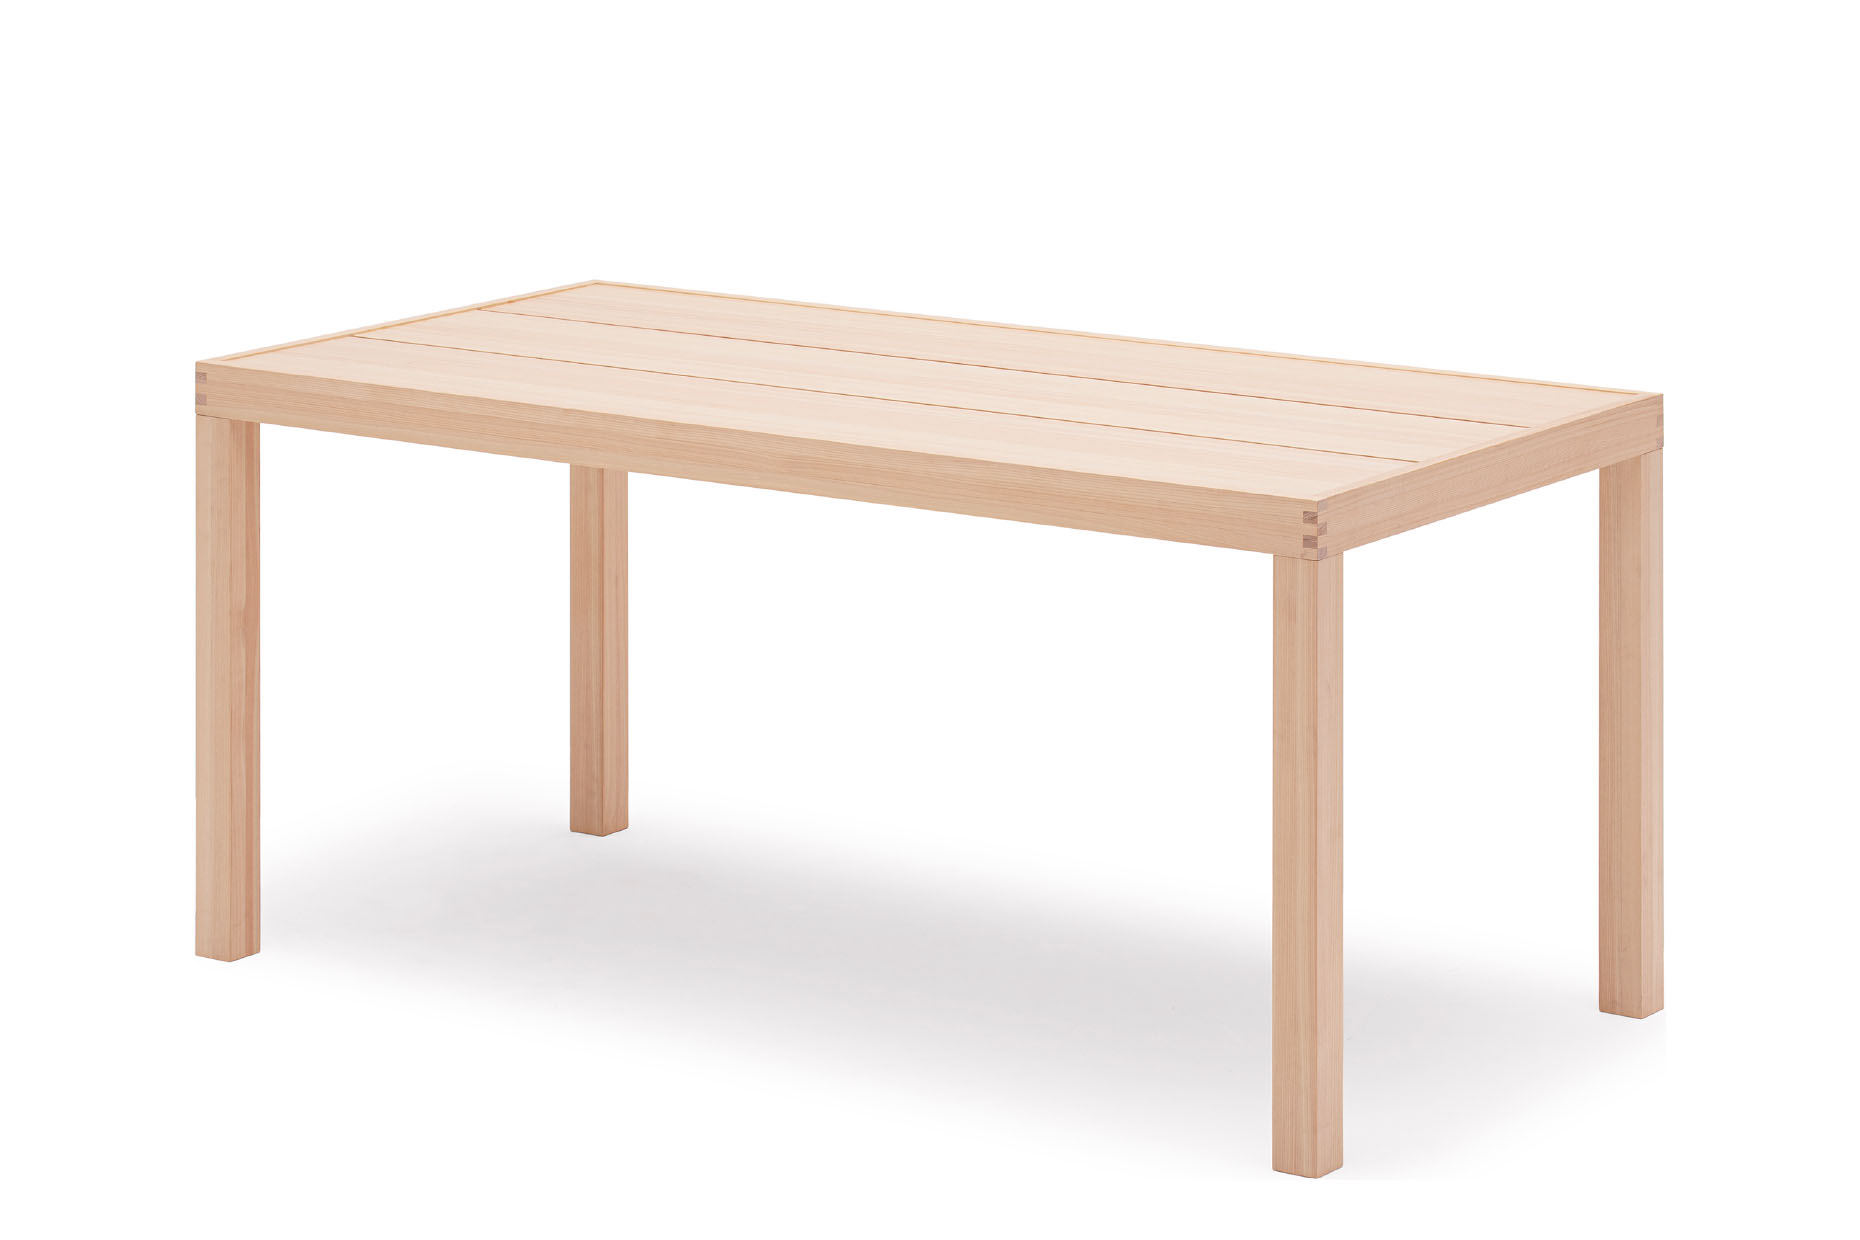 WK Dining table 01